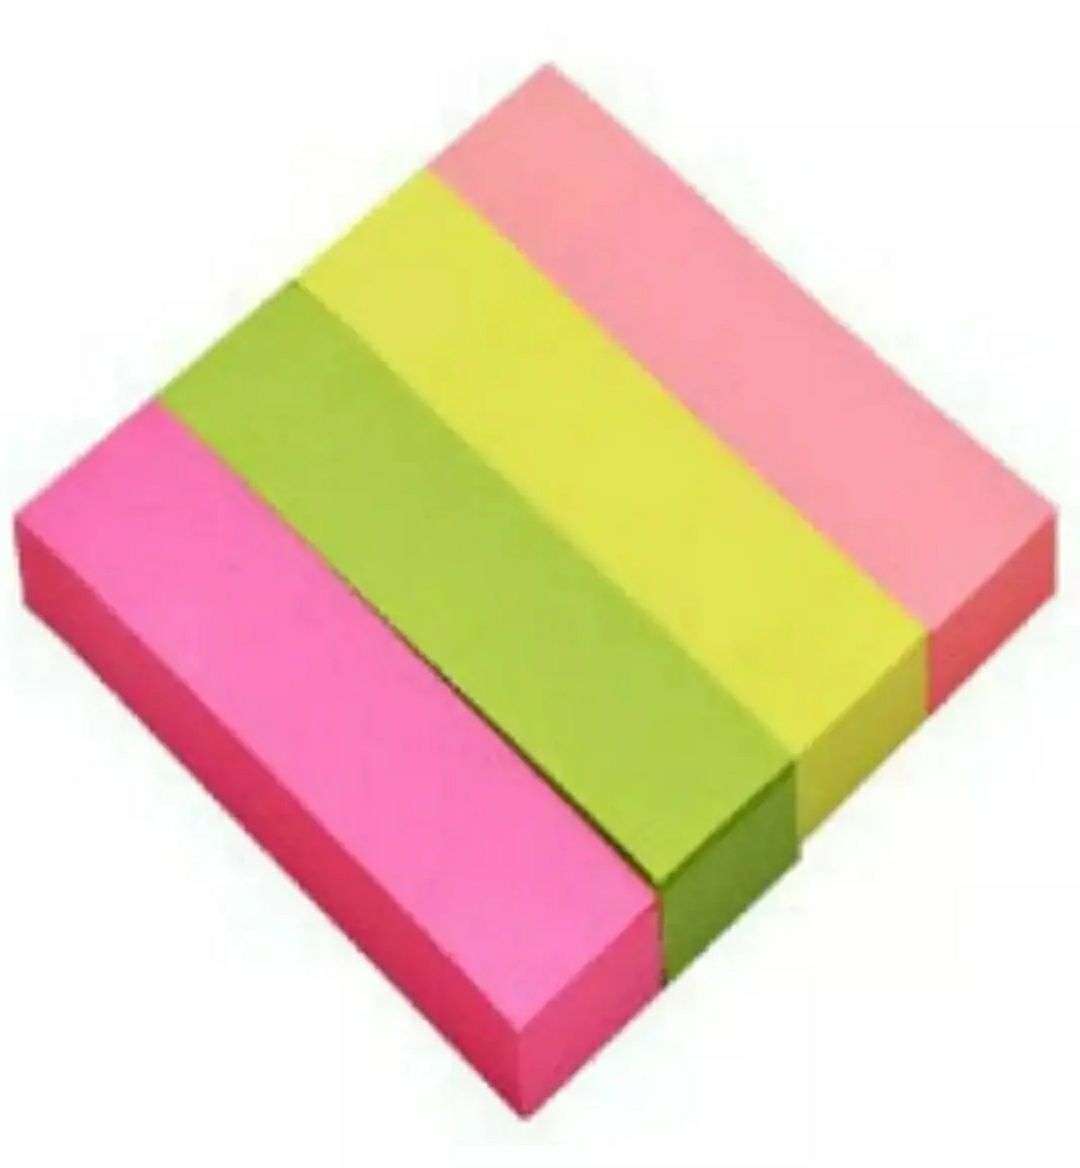 Sticky Notes 400 sticky notes small Sheets Regular, 5 Colors